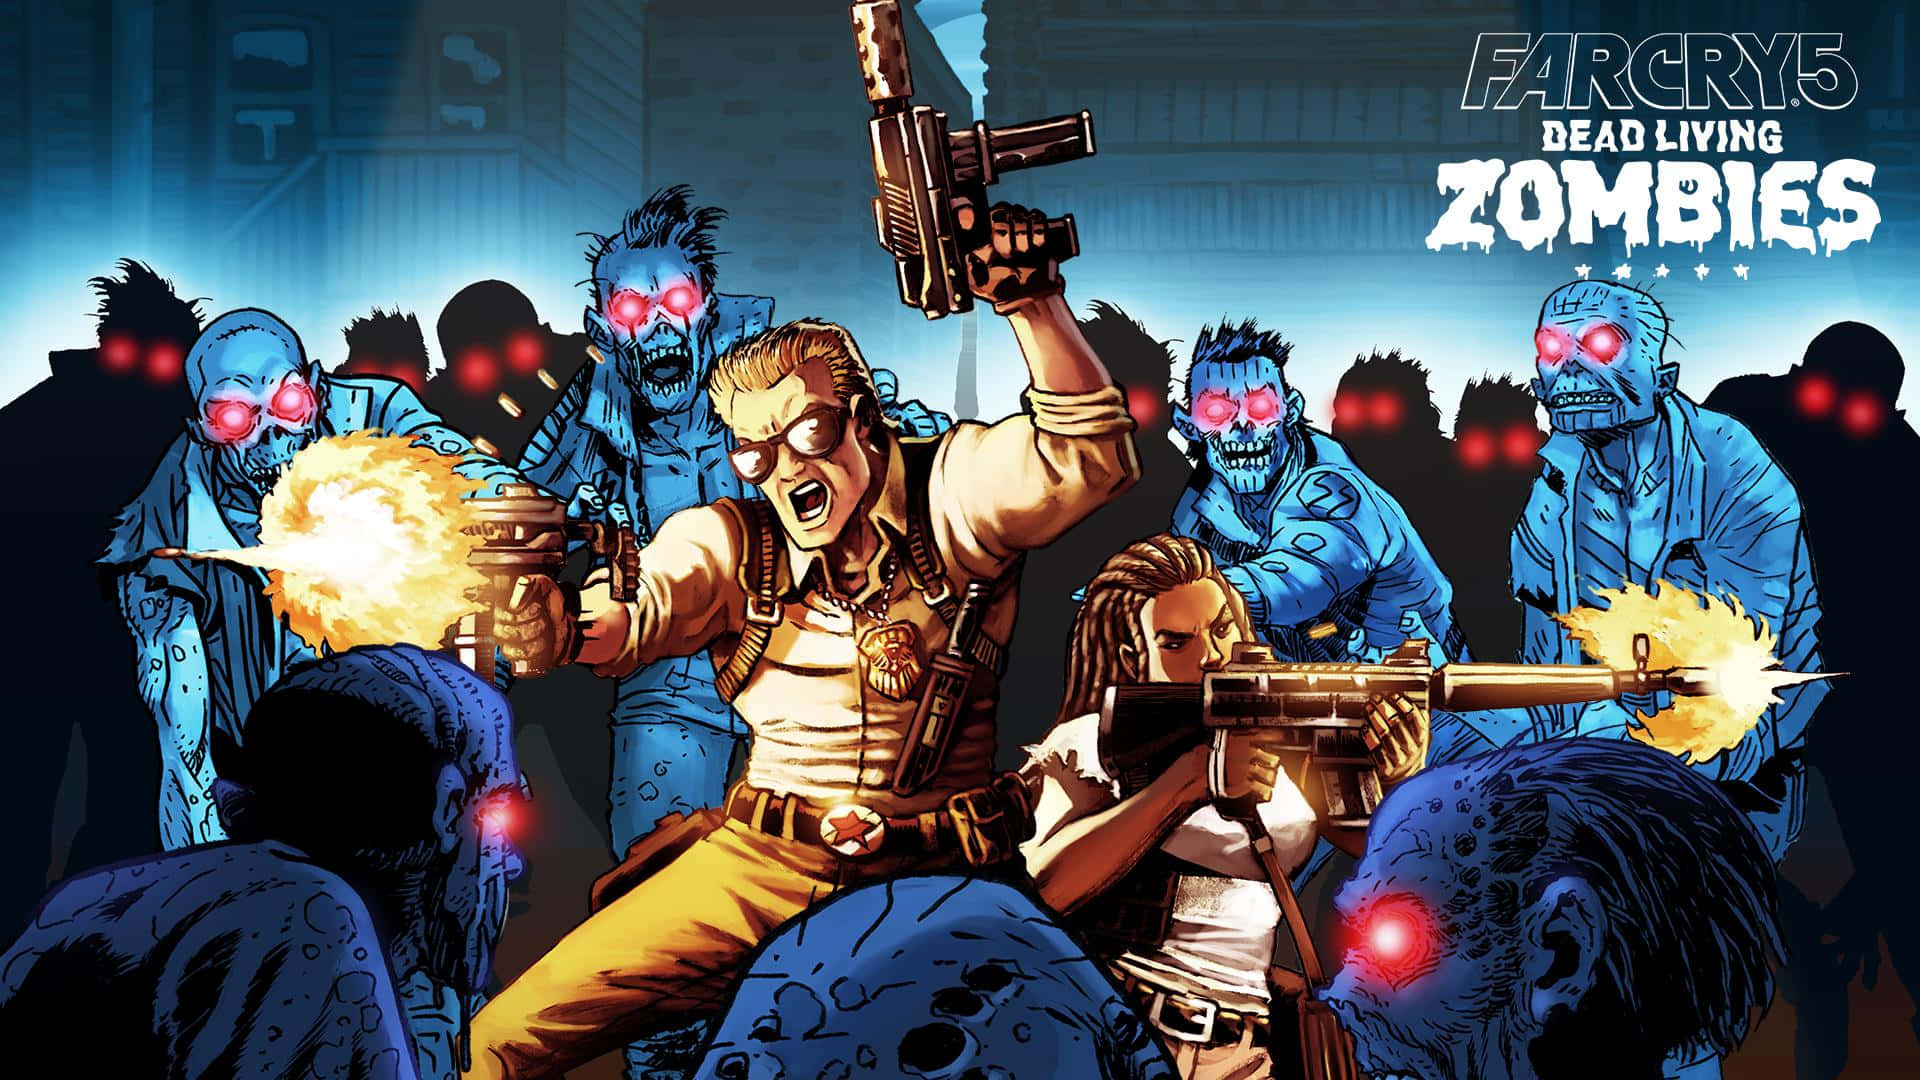 A Zombie Game With A Man Holding A Gun